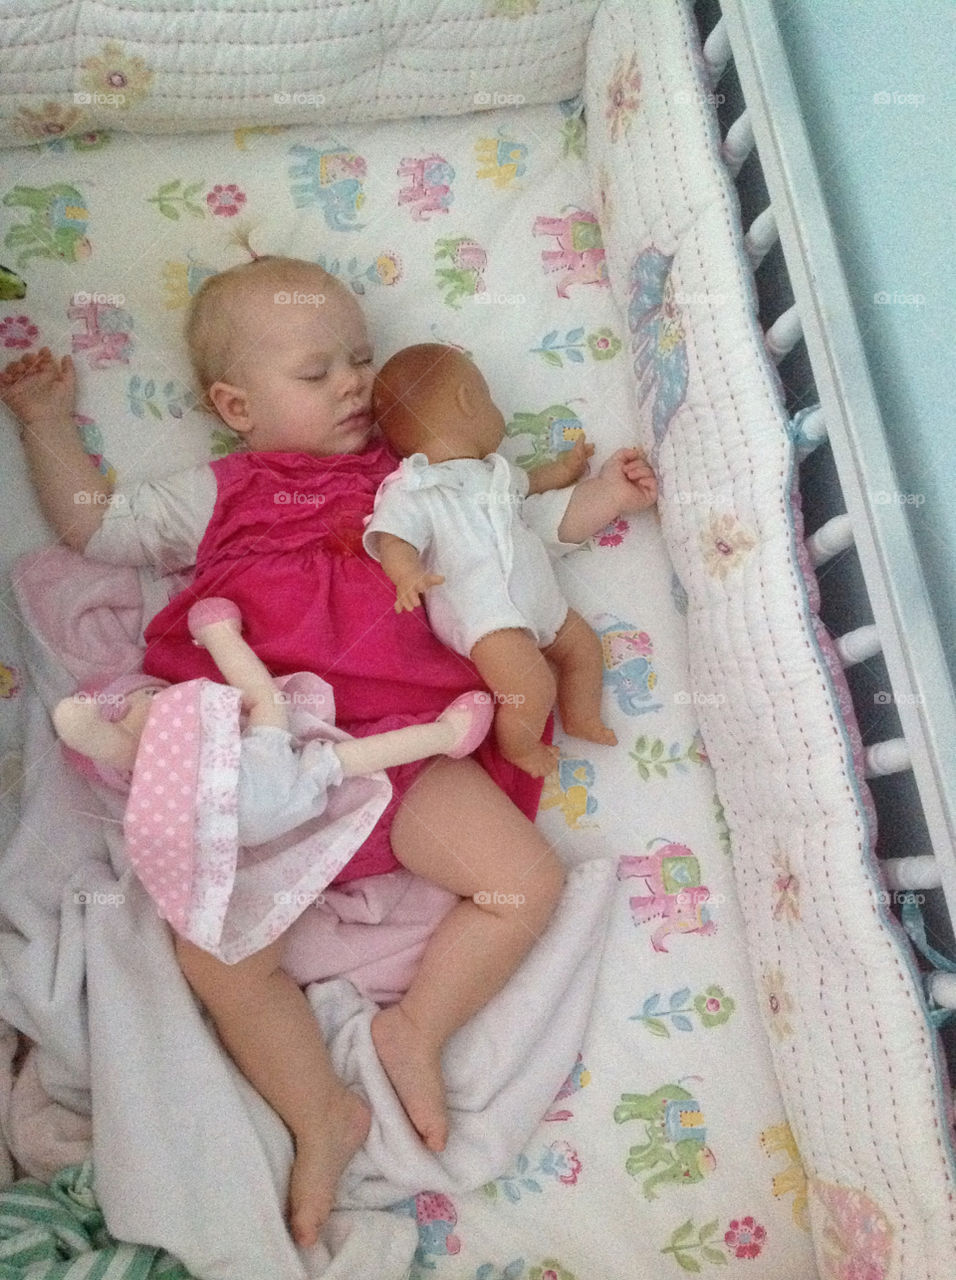 Sleeping baby loves her dolly